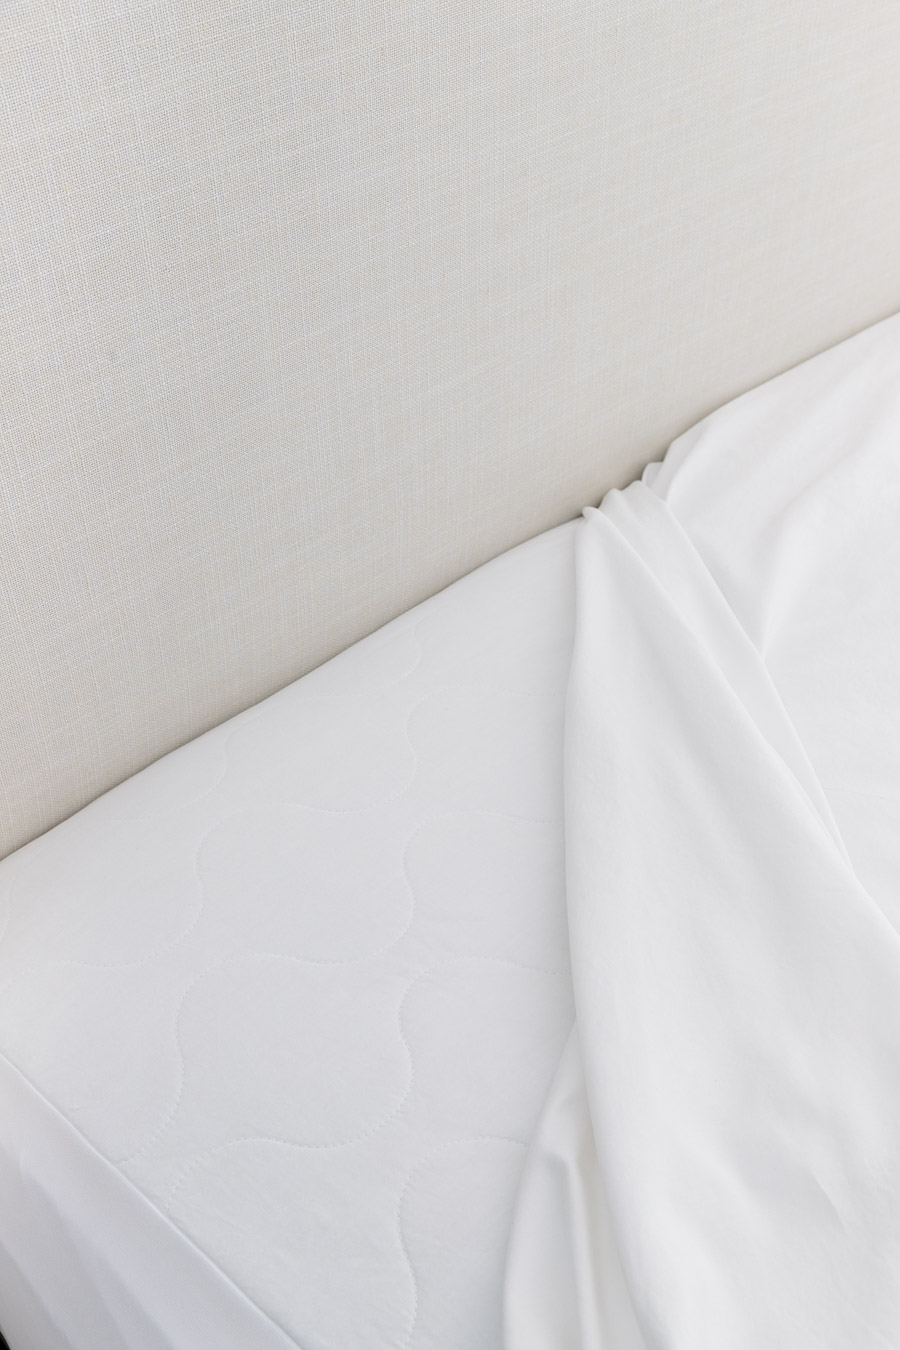 Great recommendations for the exact products to cover and protect your mattress with!